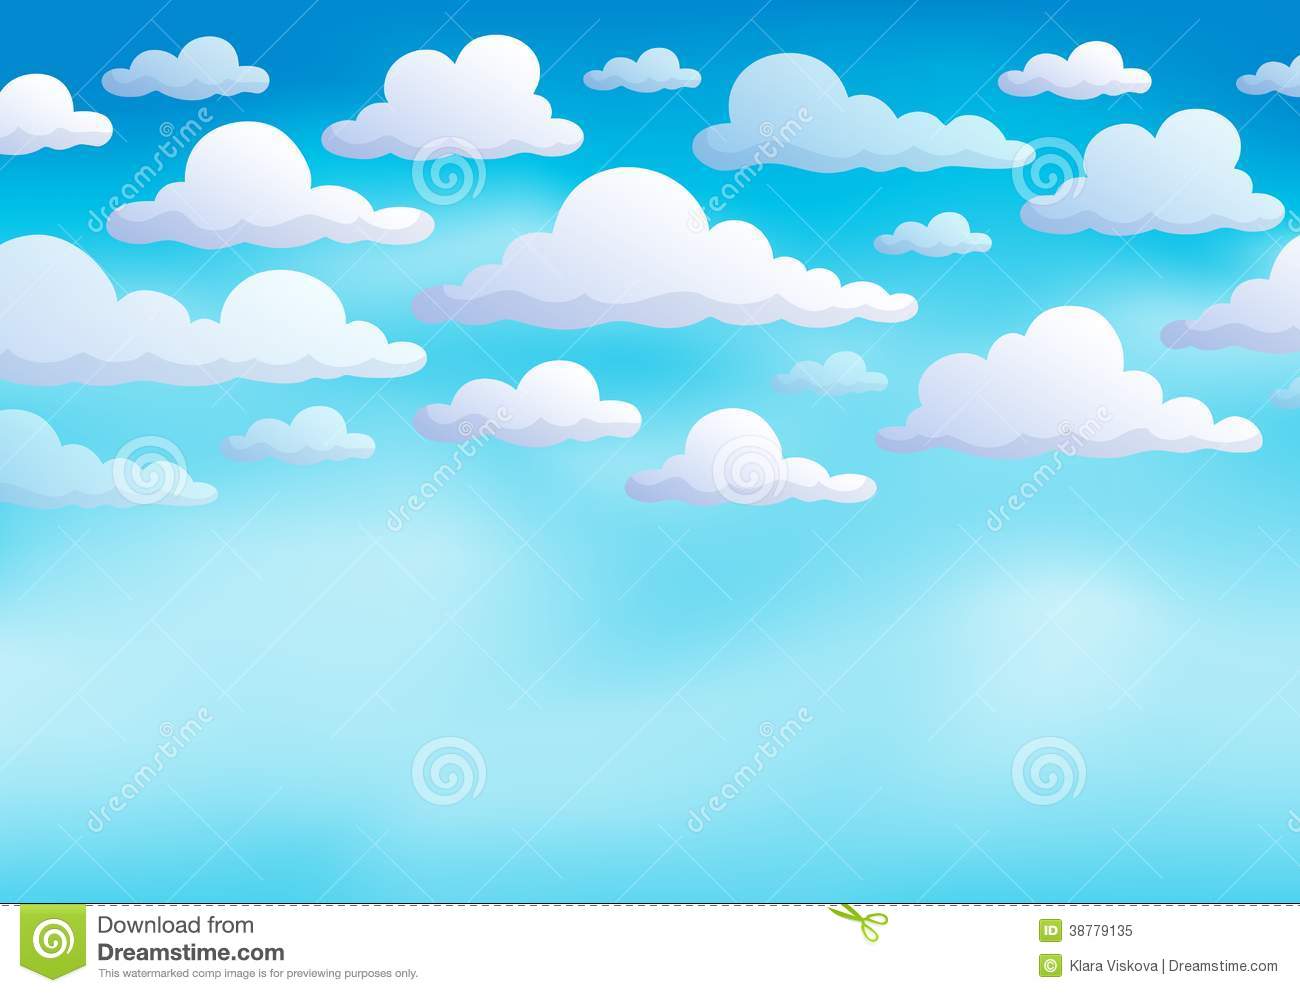 clipart clouds background - photo #21